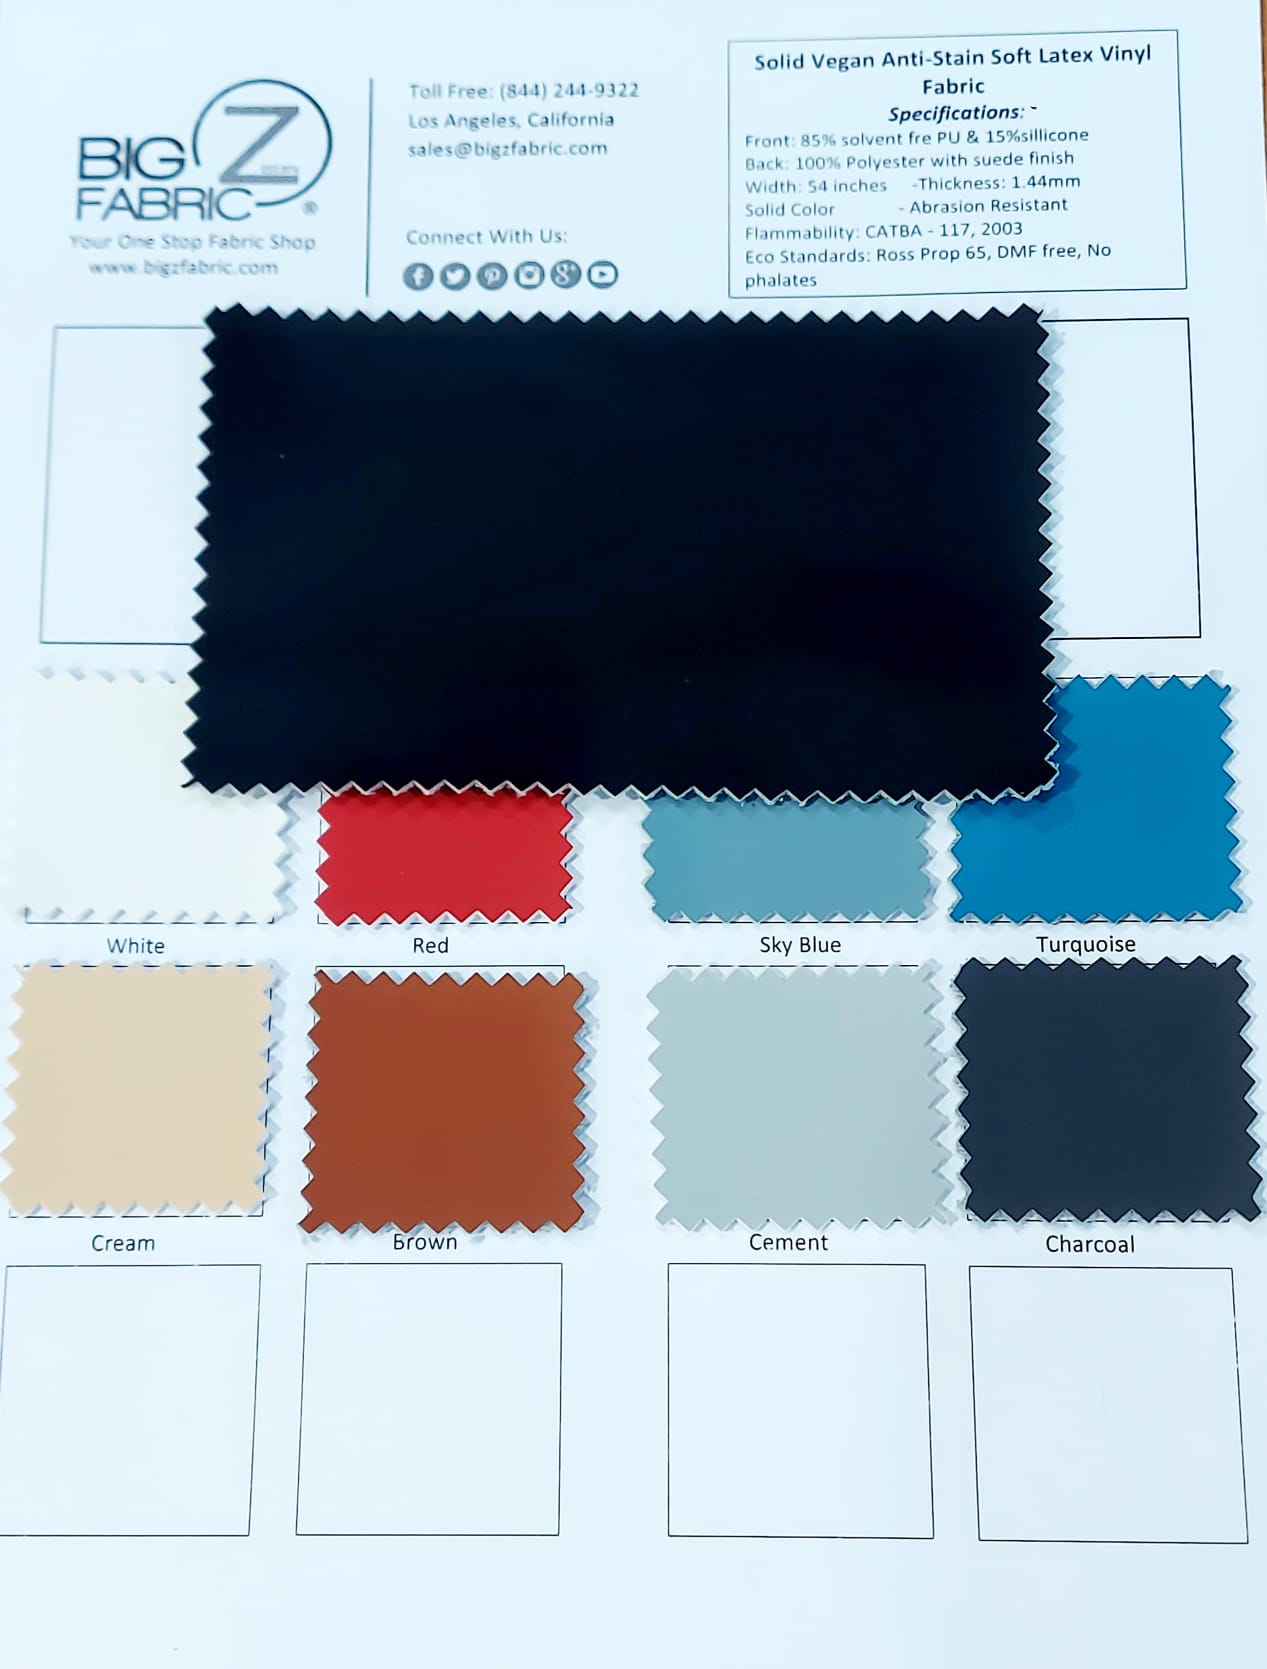 Color Card Solid Vegan Stretch Anti-Stain Soft Silicone Vinyl Fabric